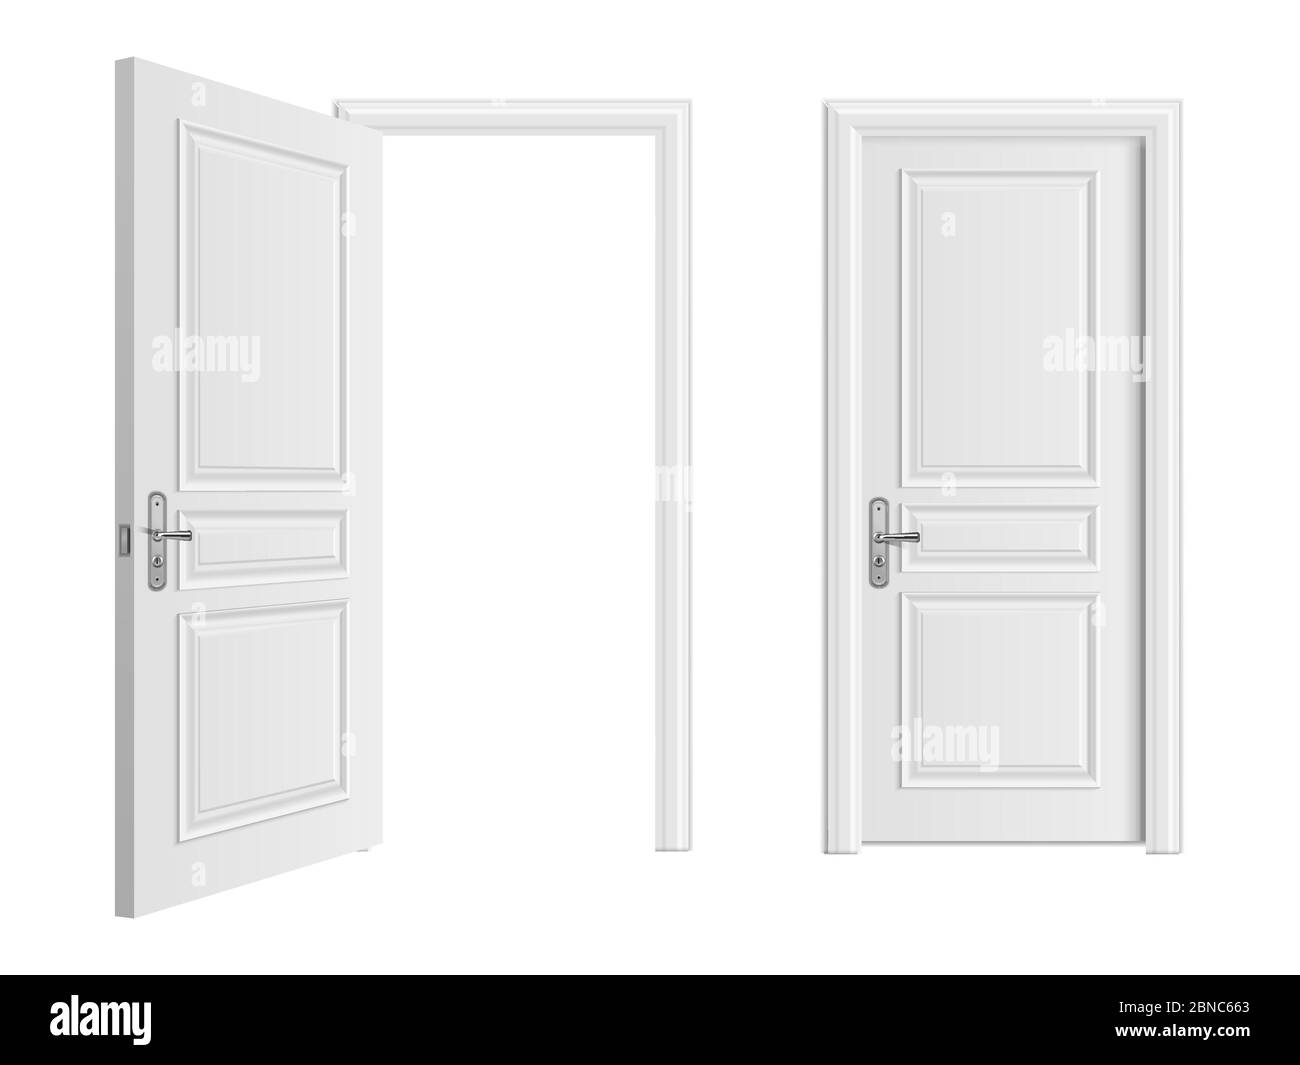 Open and closed white entrance realistic door isolated on white background. Door to house or room, enter doorway closed illustration Stock Vector